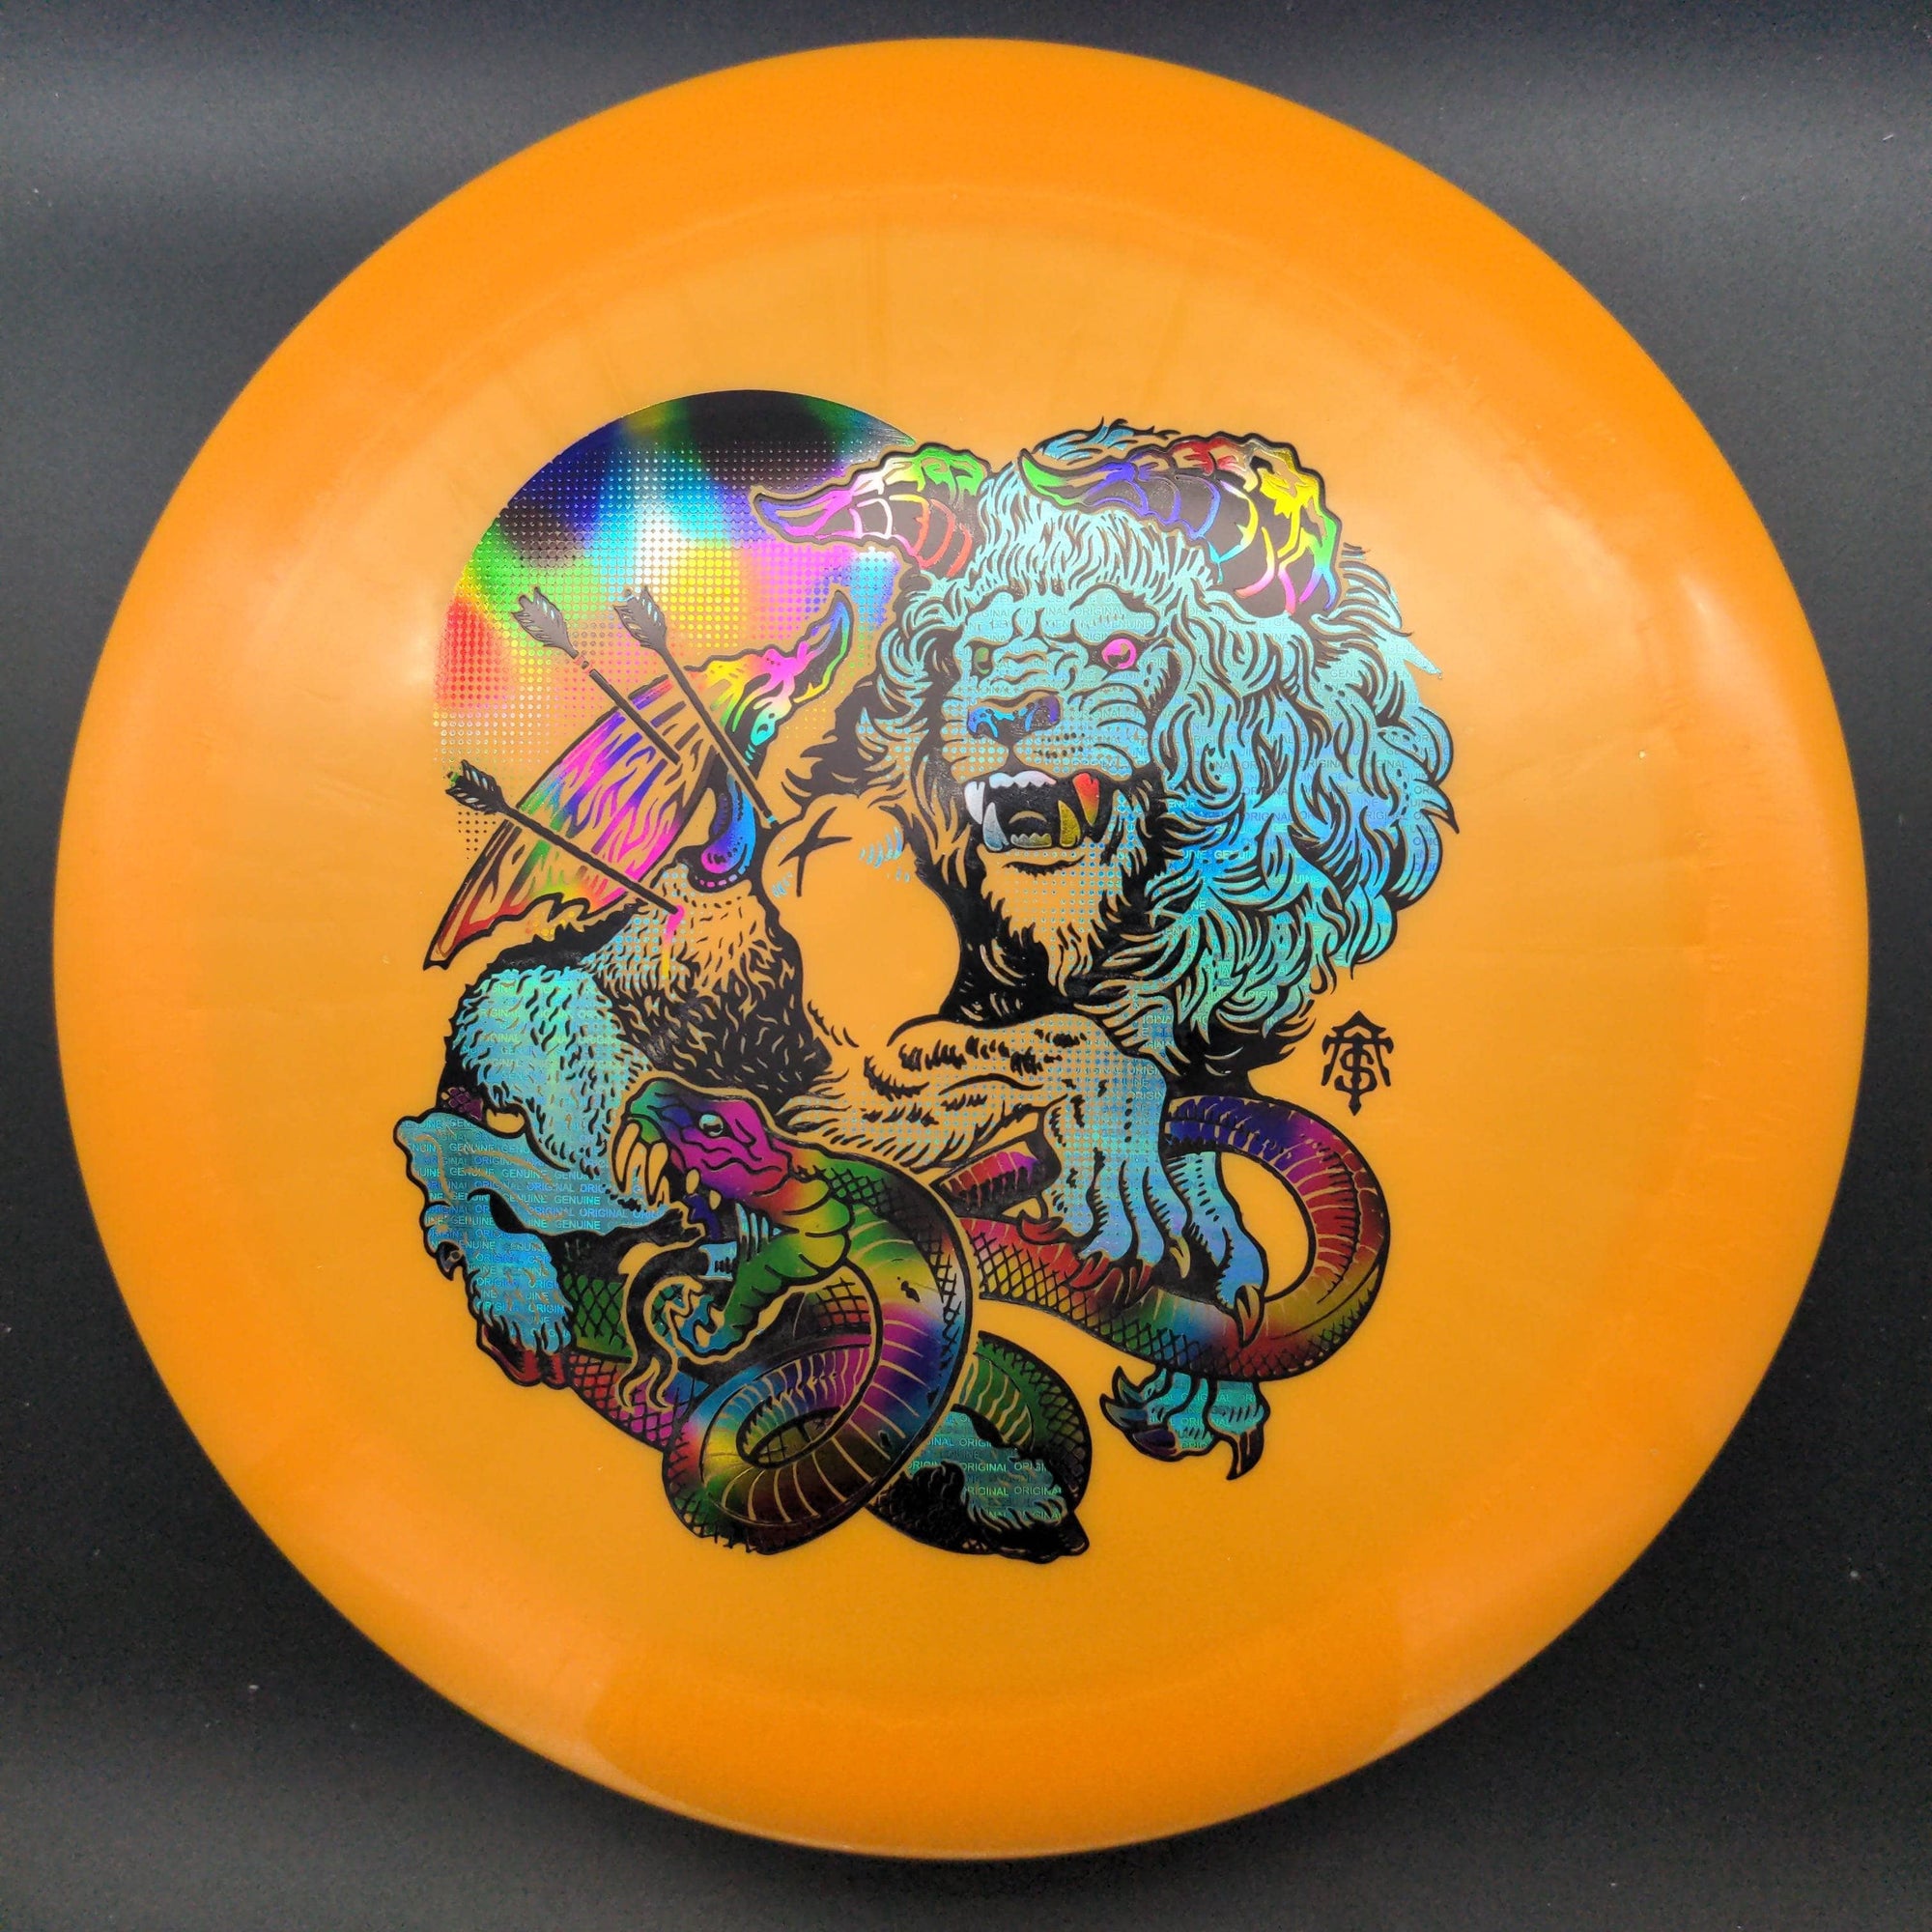 Infinite Discs Distance Driver Orange Partytime/Silver Shimmer 175g Emperor, G-Line, Thought Space Stamp